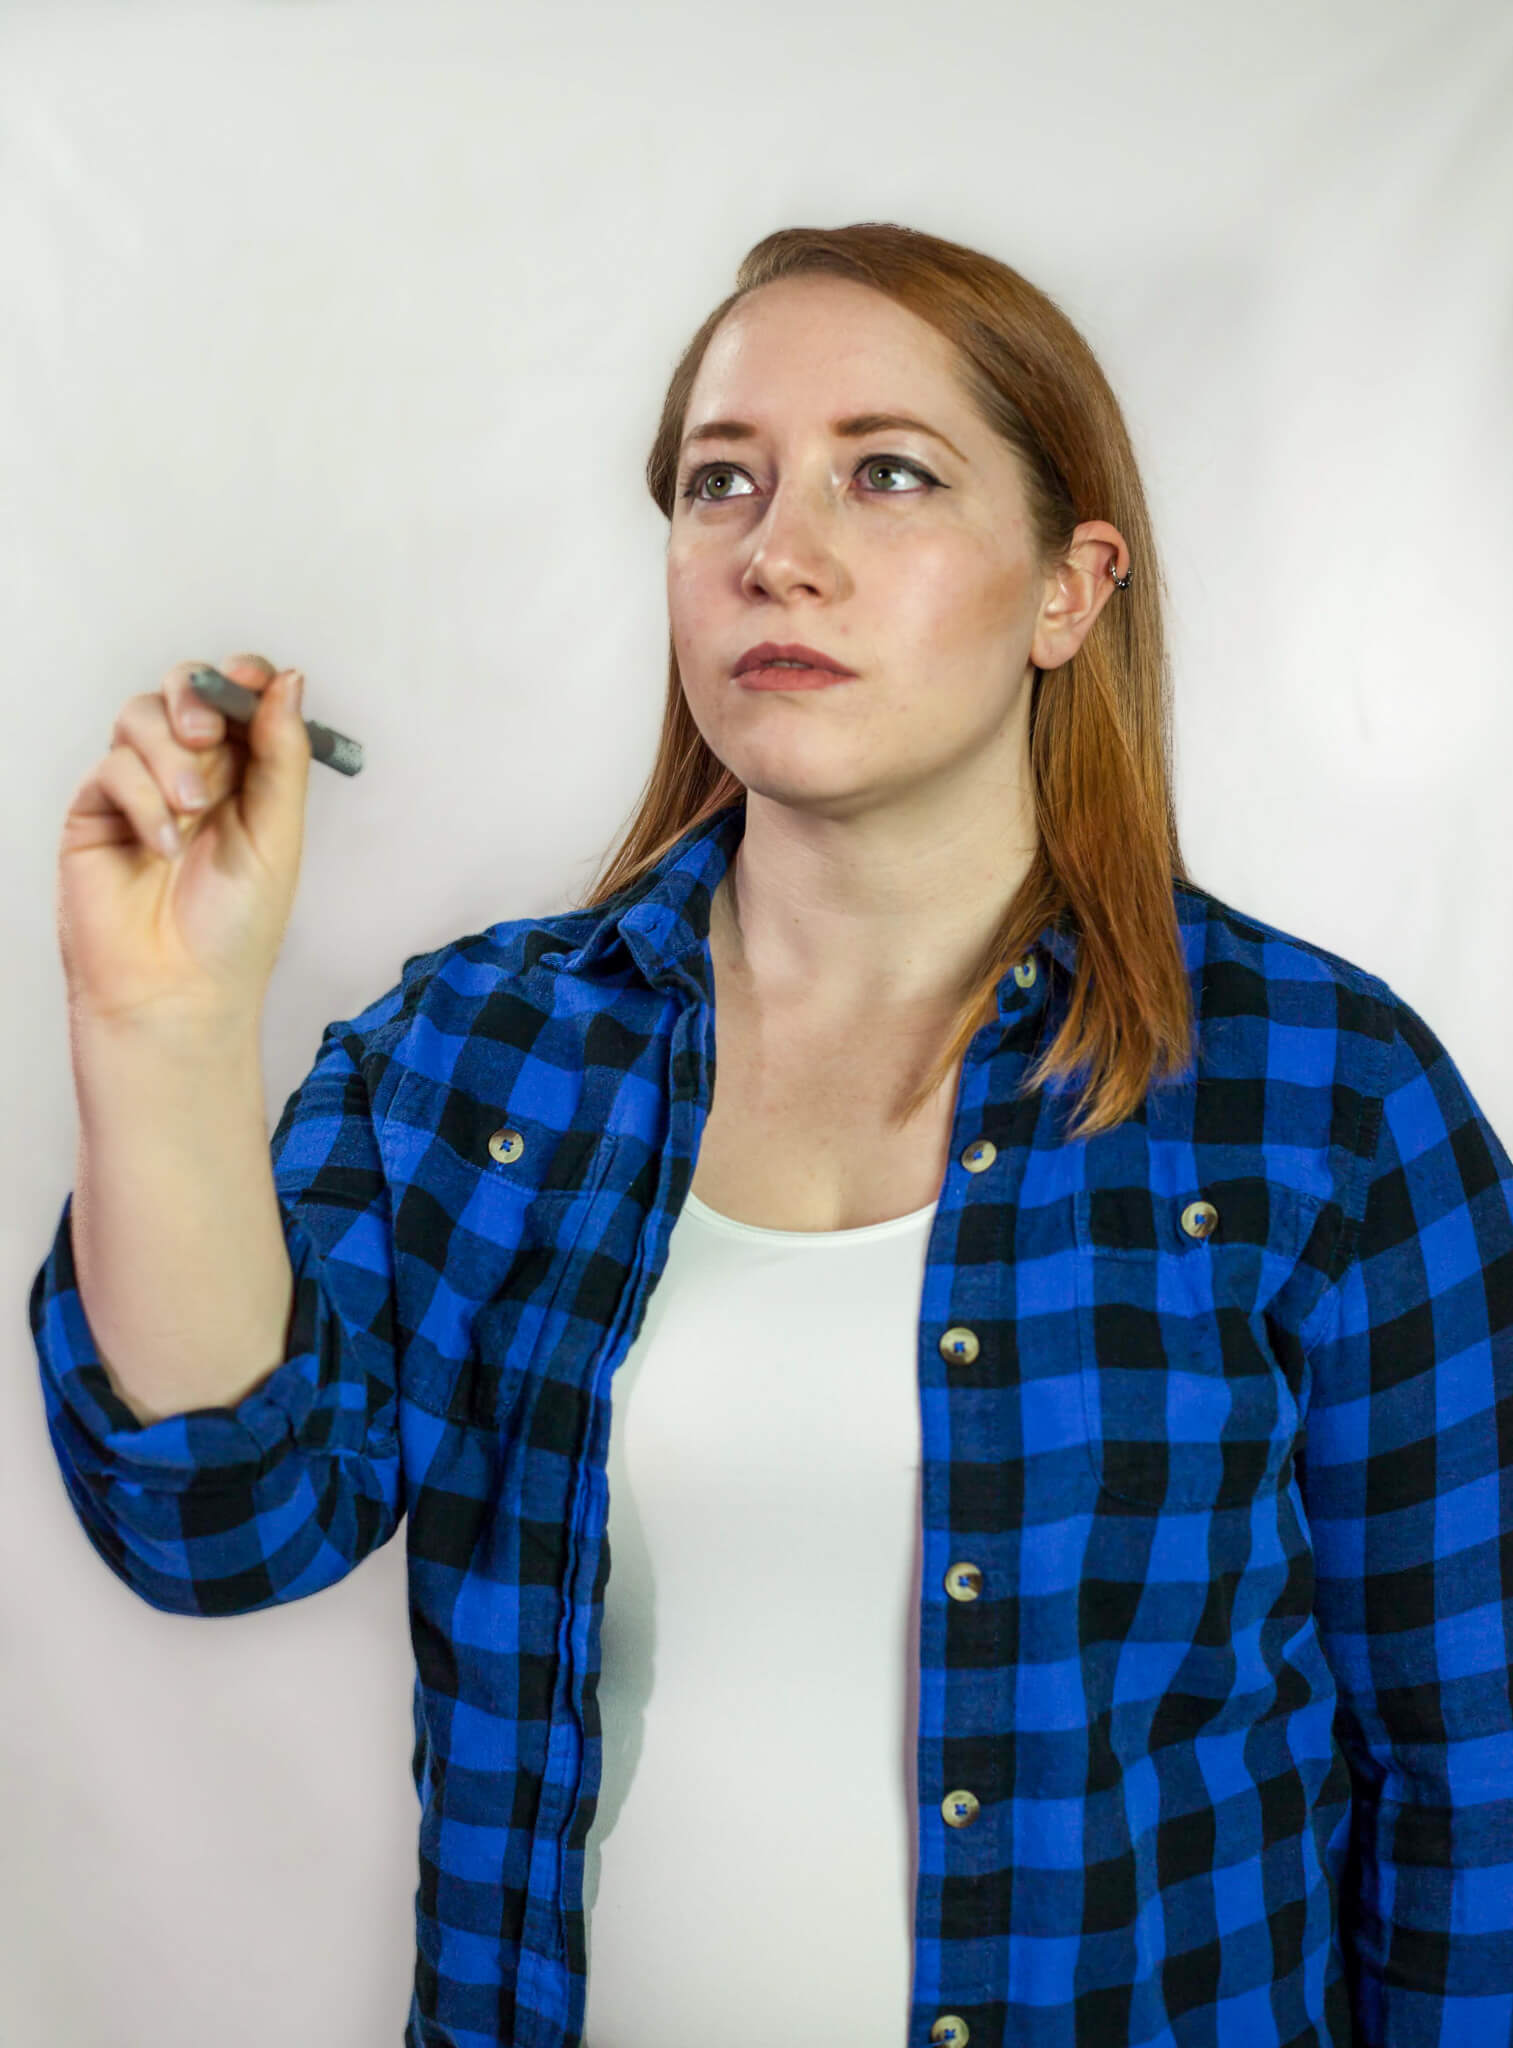 A photo of Tessa holding a stylus as if writing on a smartboard. They are a white human with medium-length auburn hair wearing a blue plaid button up shirt with a white camisole underneath.